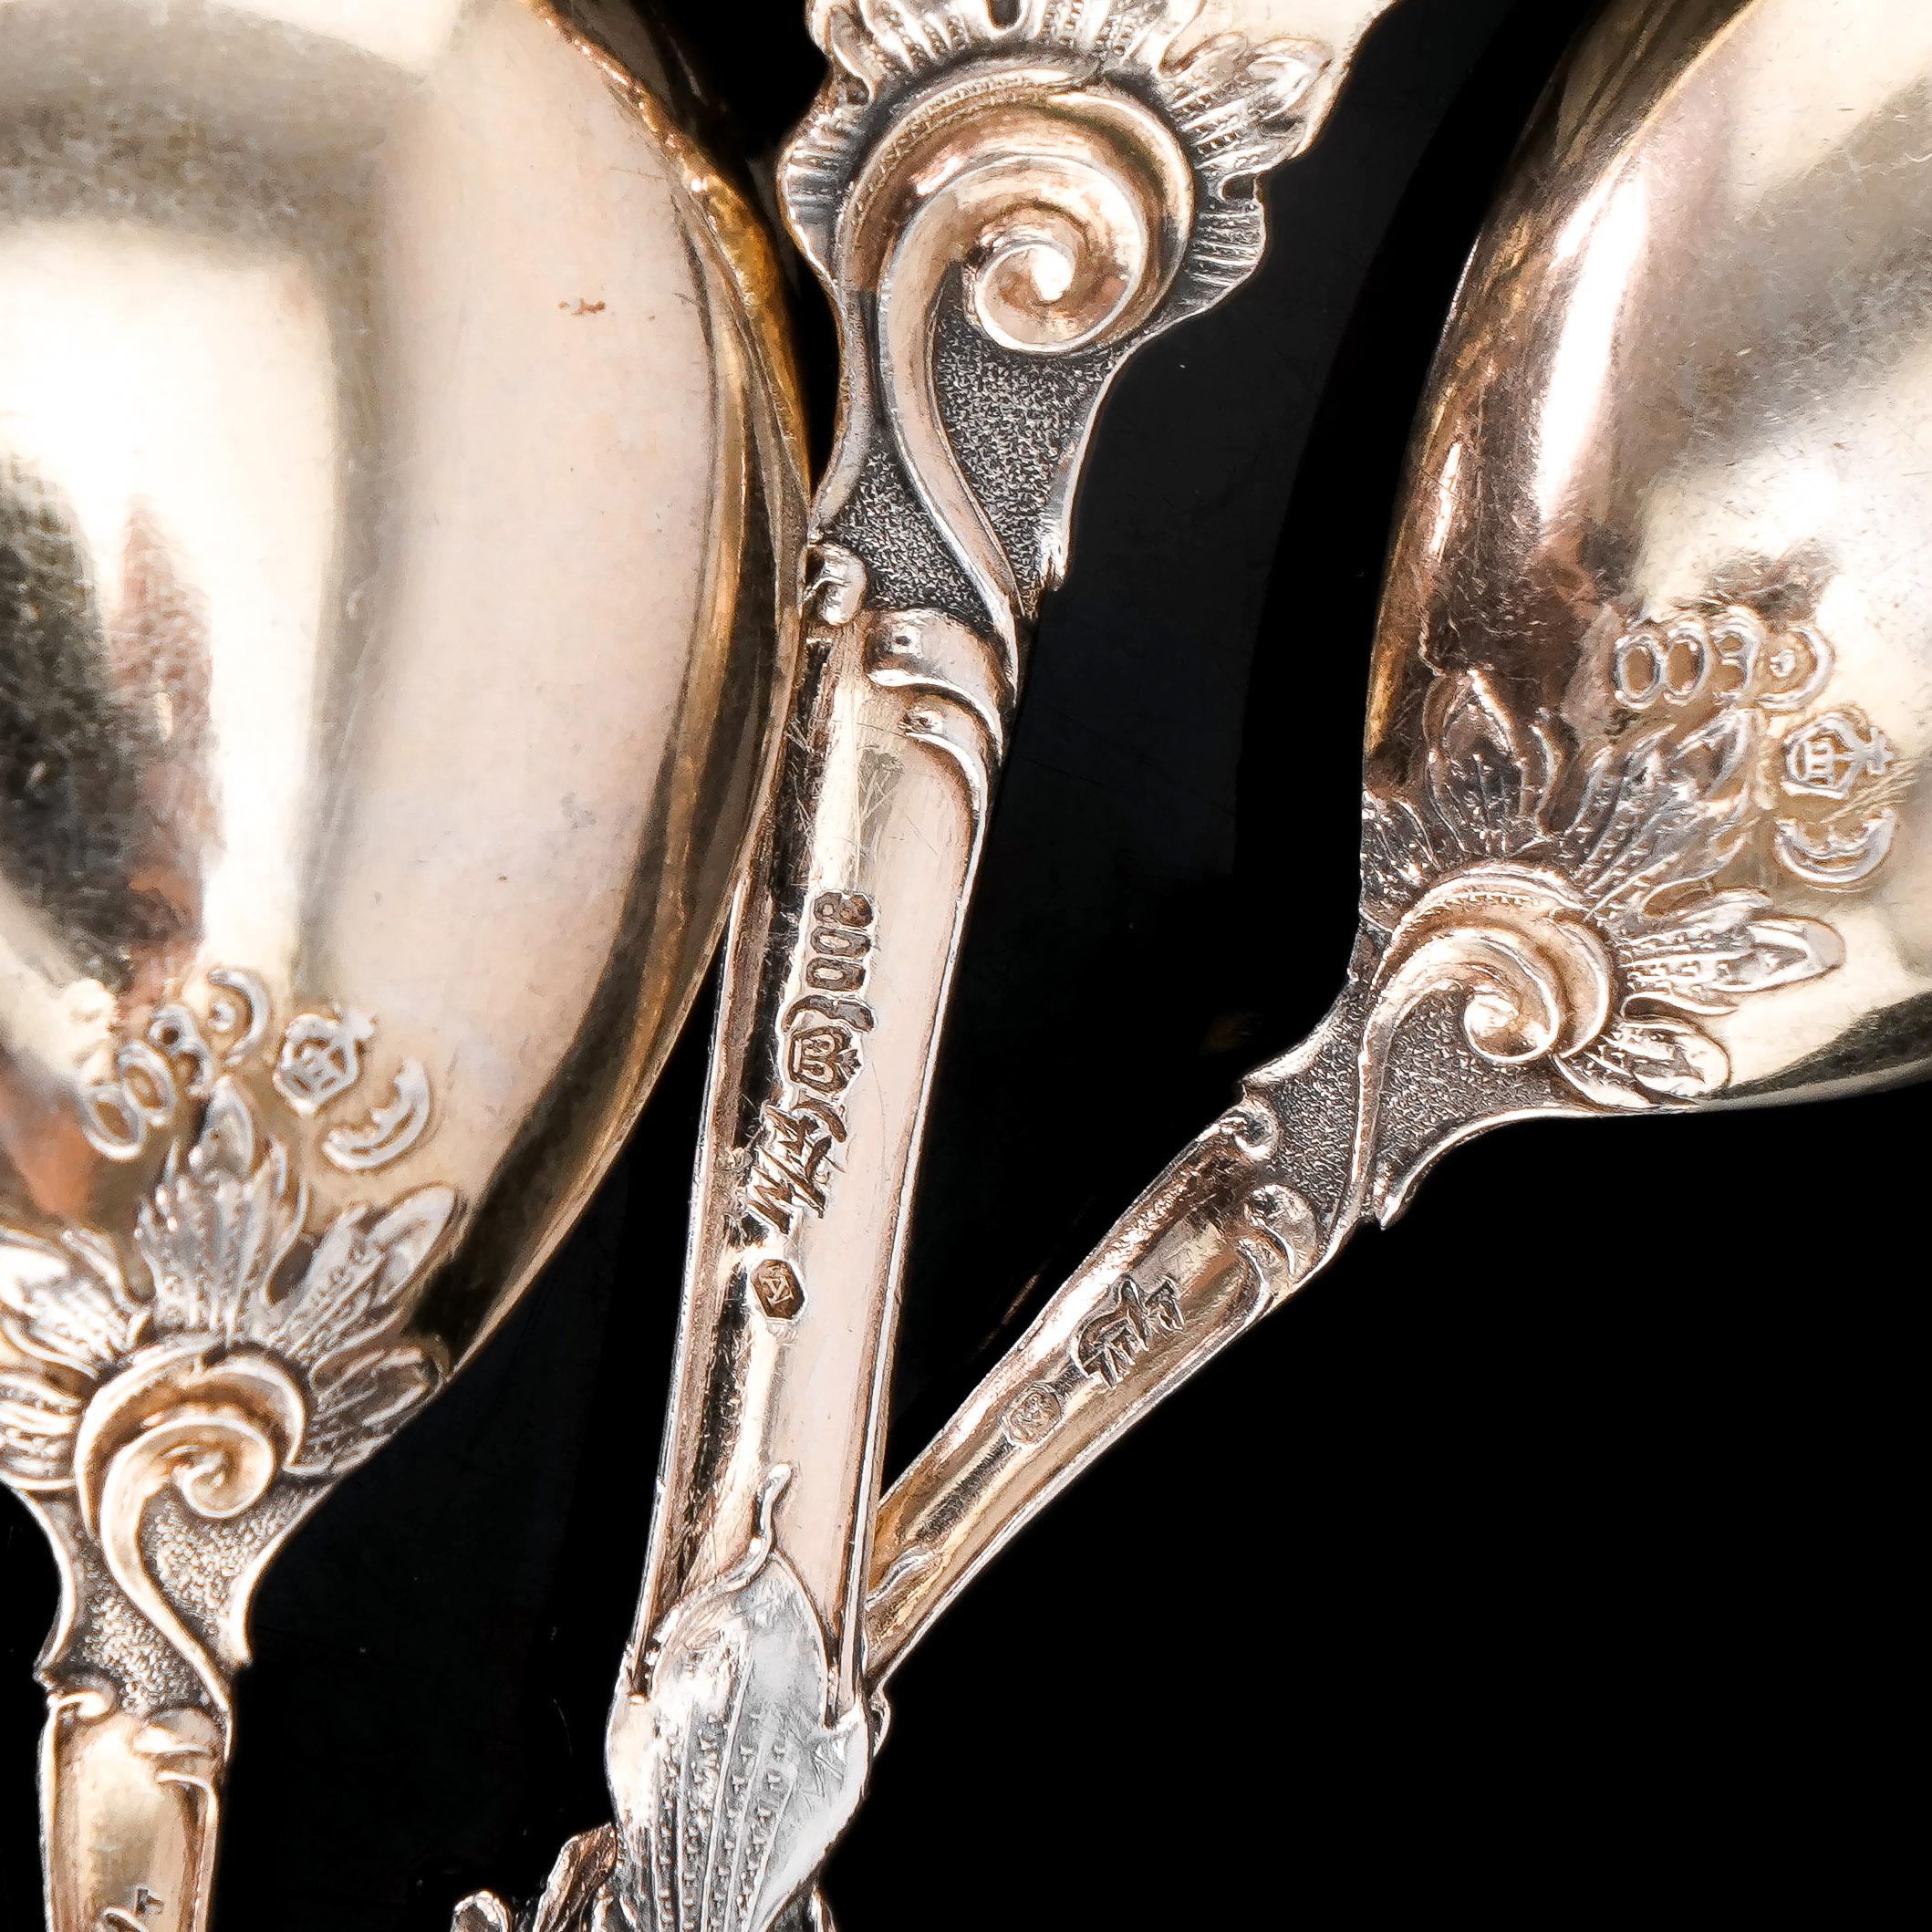 Antique German Solid Silver Icecream Server & Spoons in Rococo Style - c.1900 For Sale 6